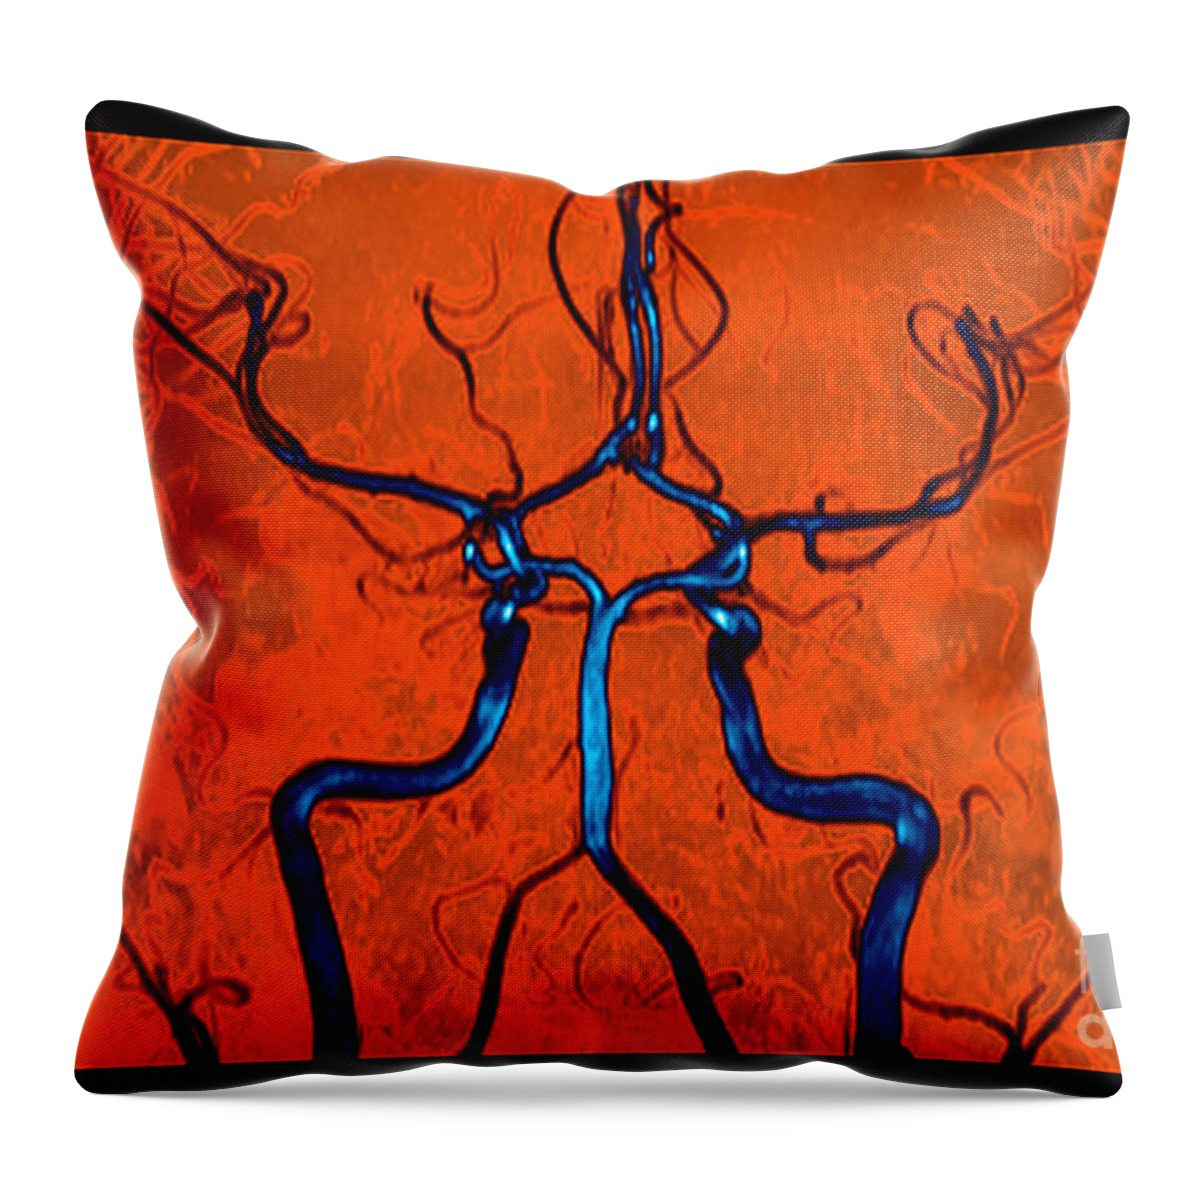 Mra Brain Throw Pillow featuring the photograph Normal Brain, Mra #1 by Living Art Enterprises